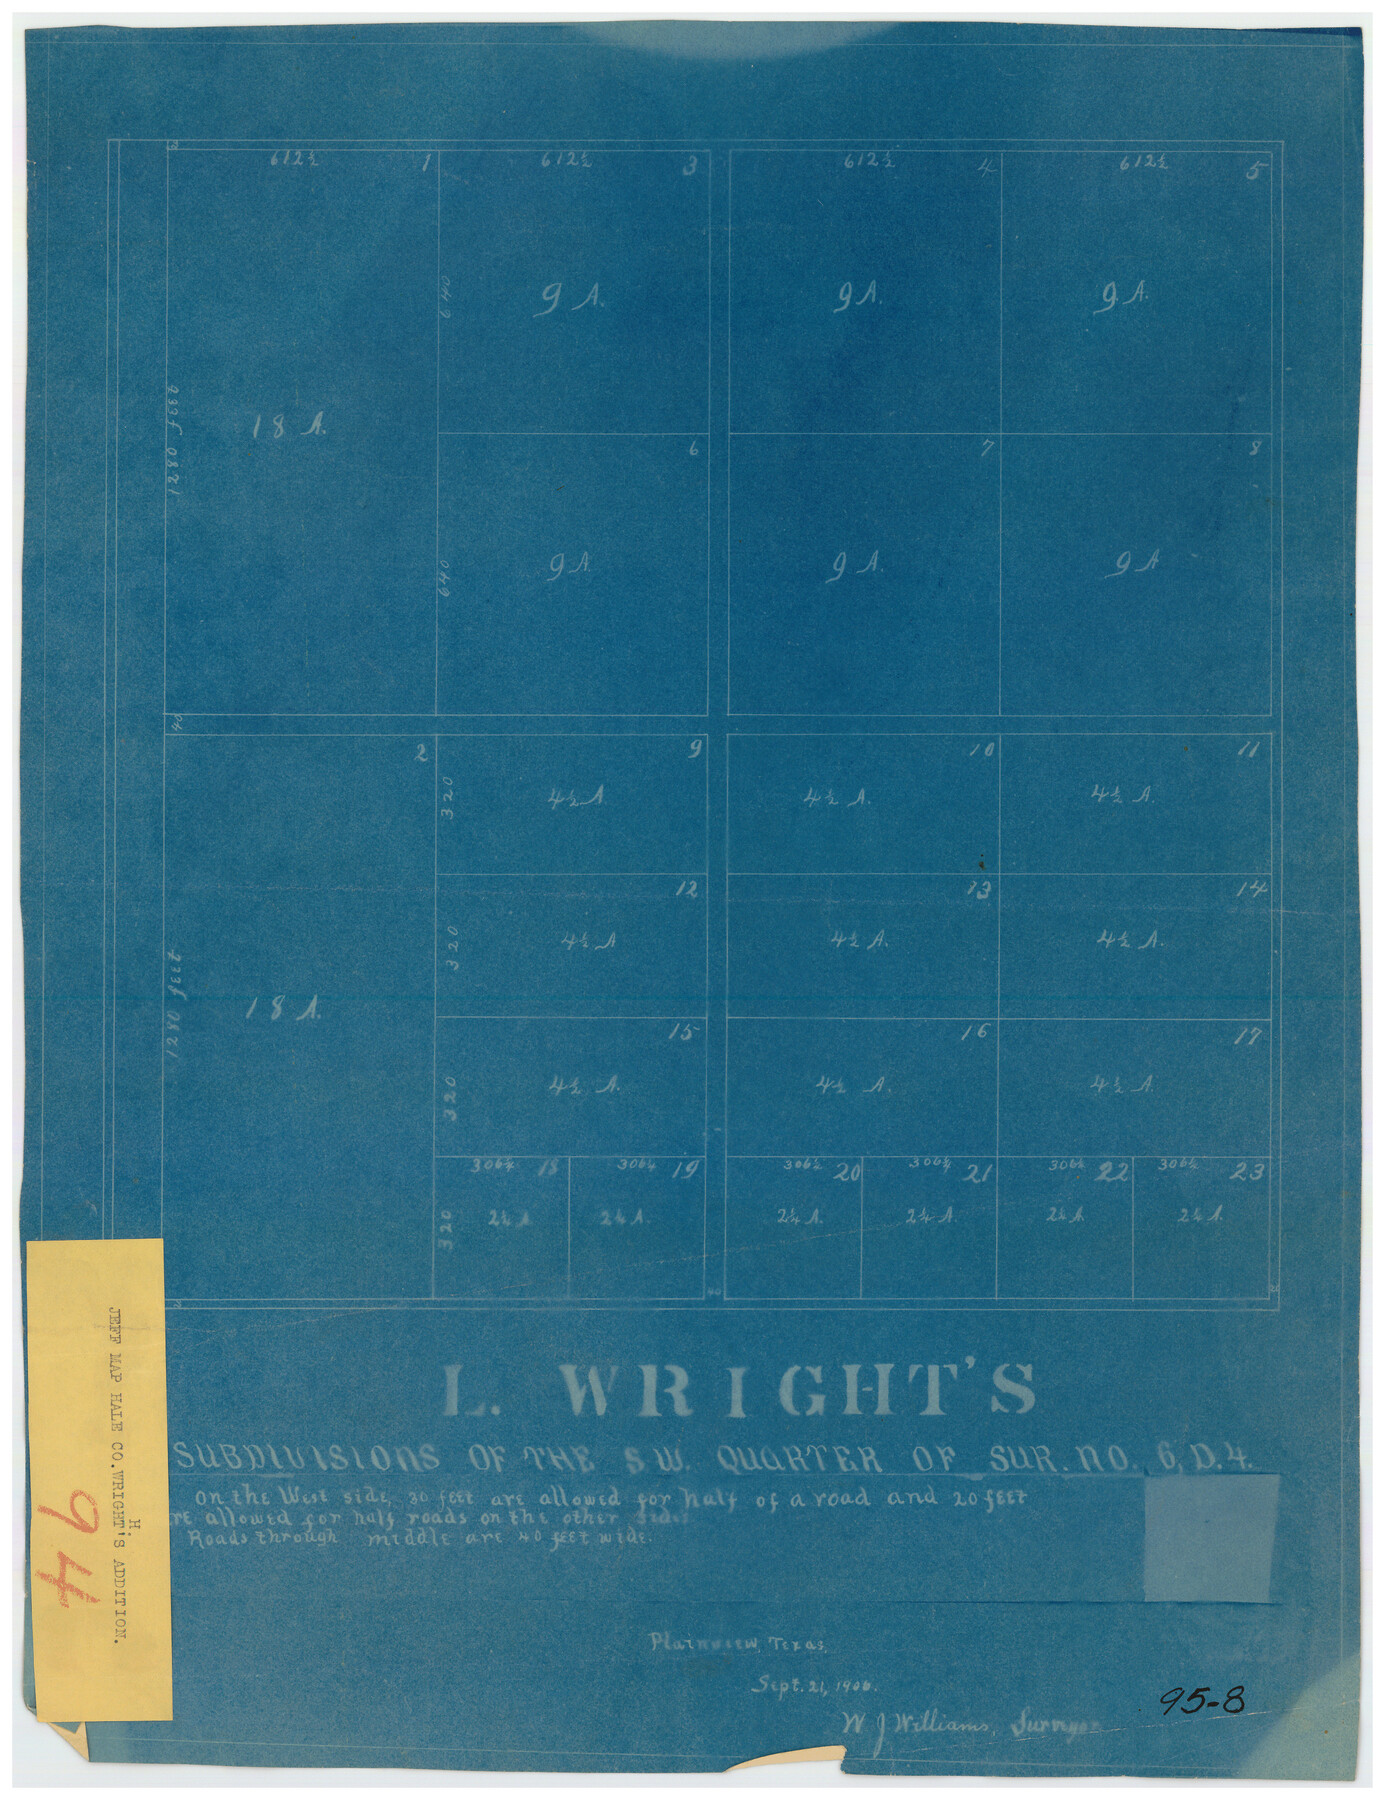 90785, L. Wright's Subdivision of the Southwest Corner of Survey Number 6, D4], Twichell Survey Records